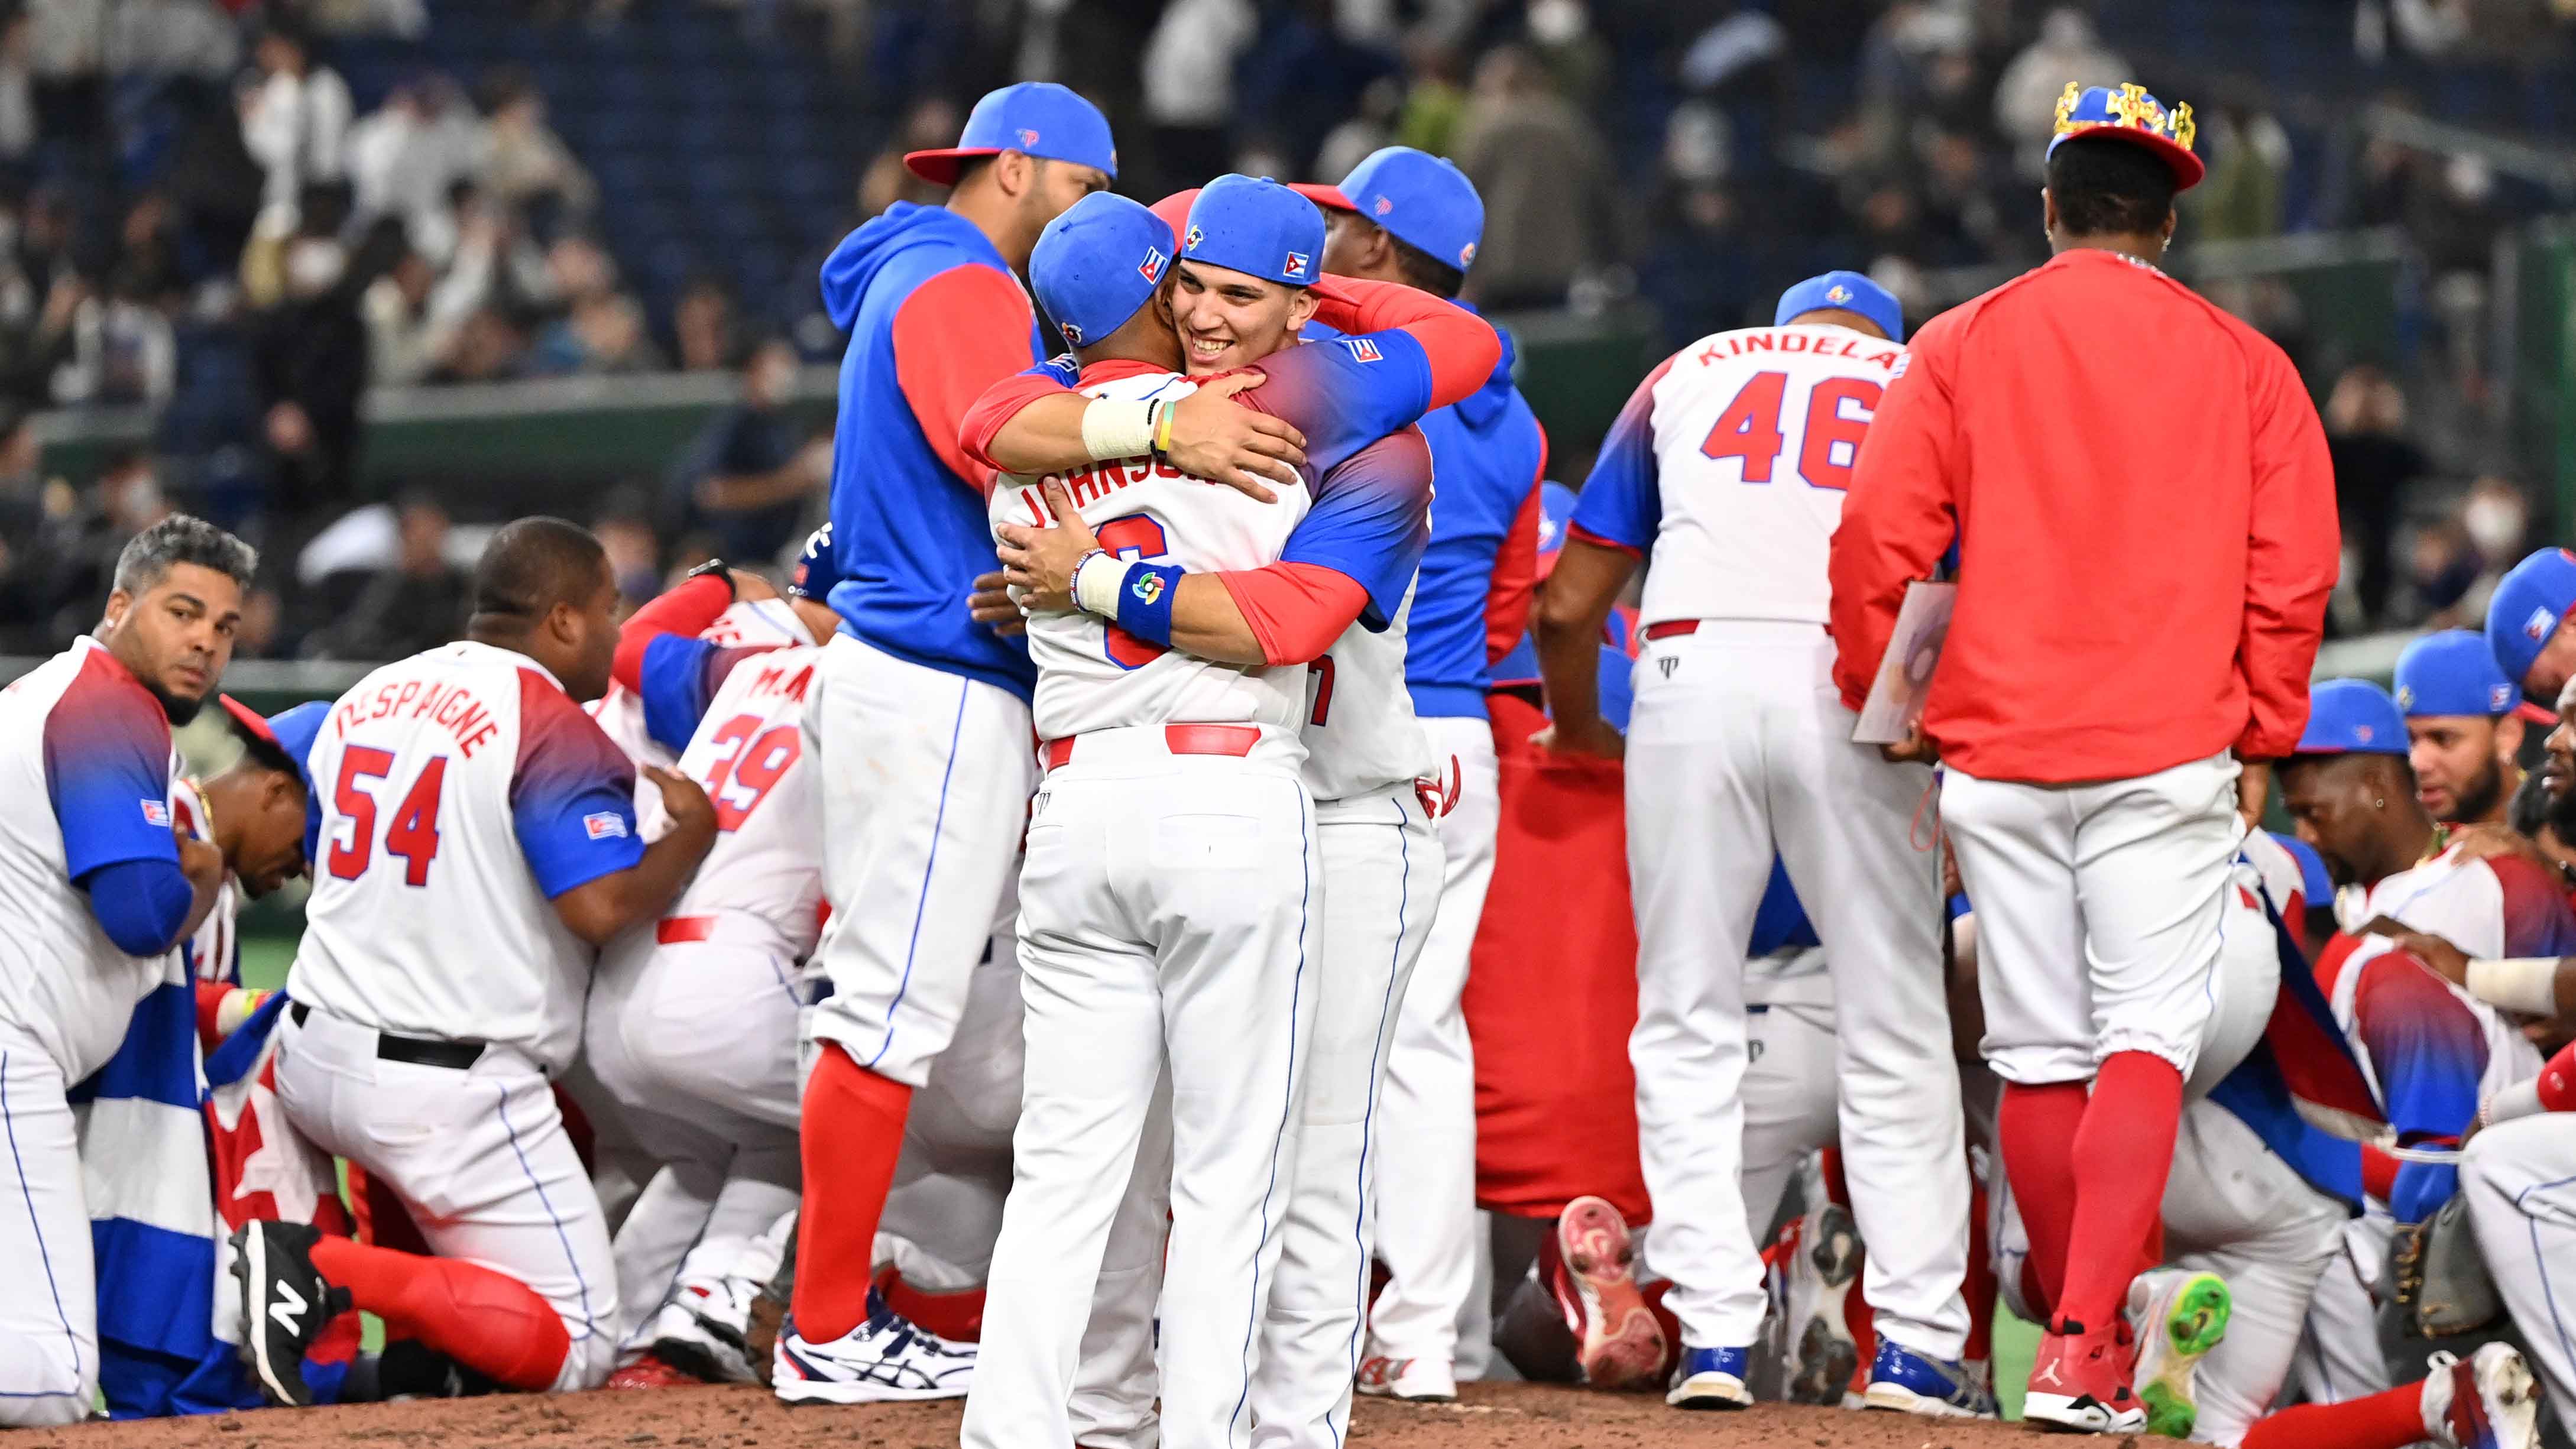 Japan and Mexico to face off after securing quarter-final wins at WBC